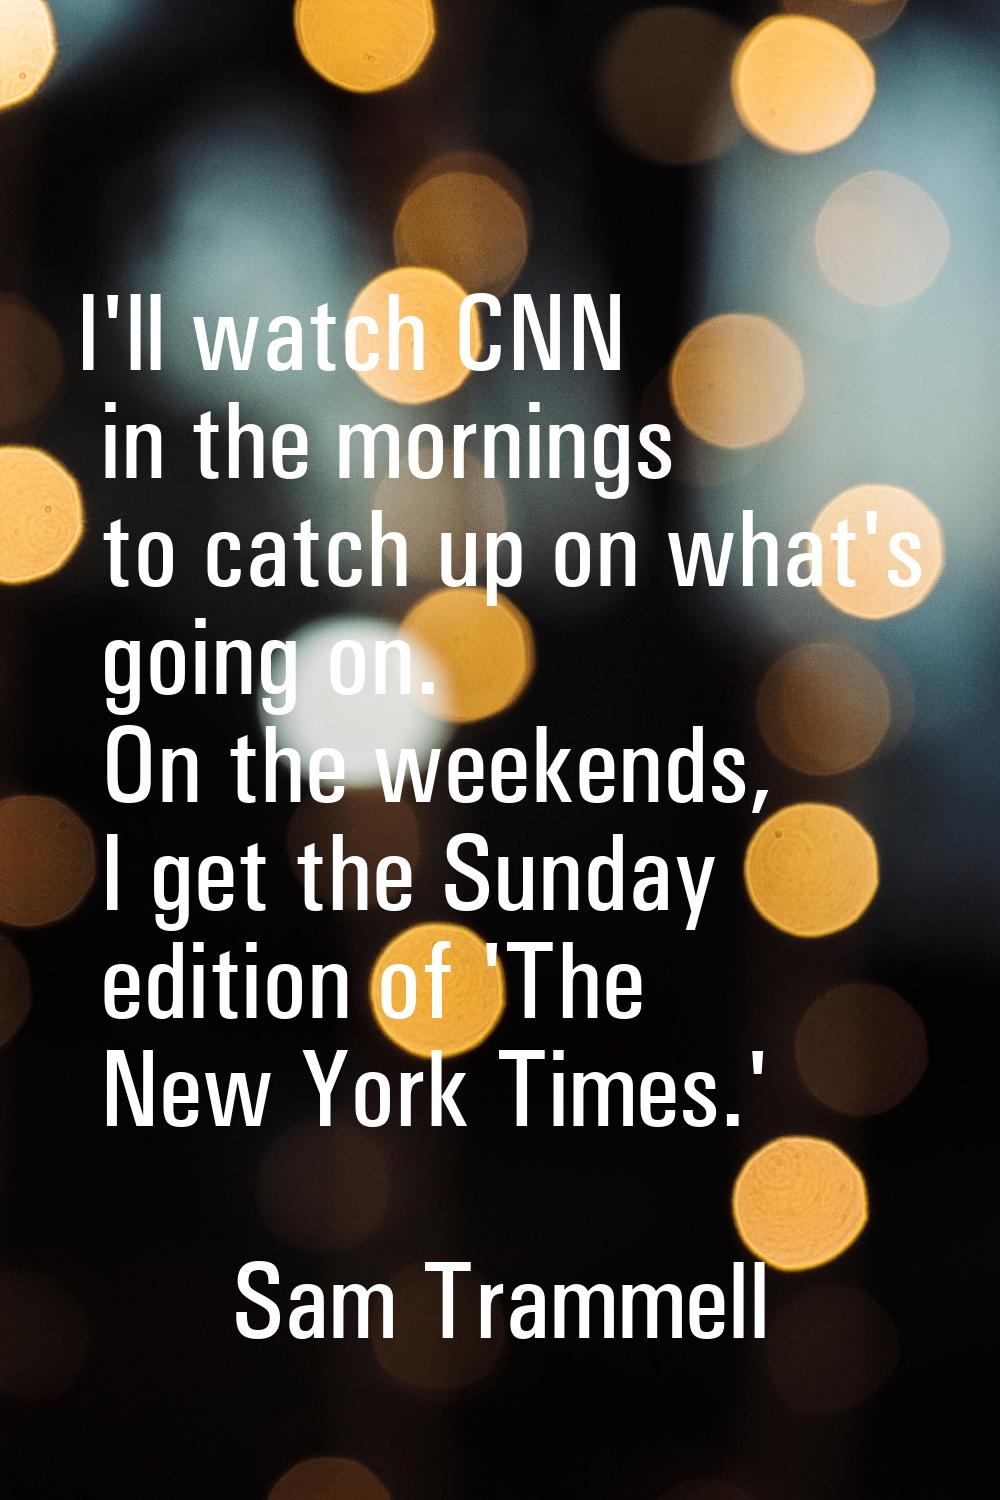 I'll watch CNN in the mornings to catch up on what's going on. On the weekends, I get the Sunday ed